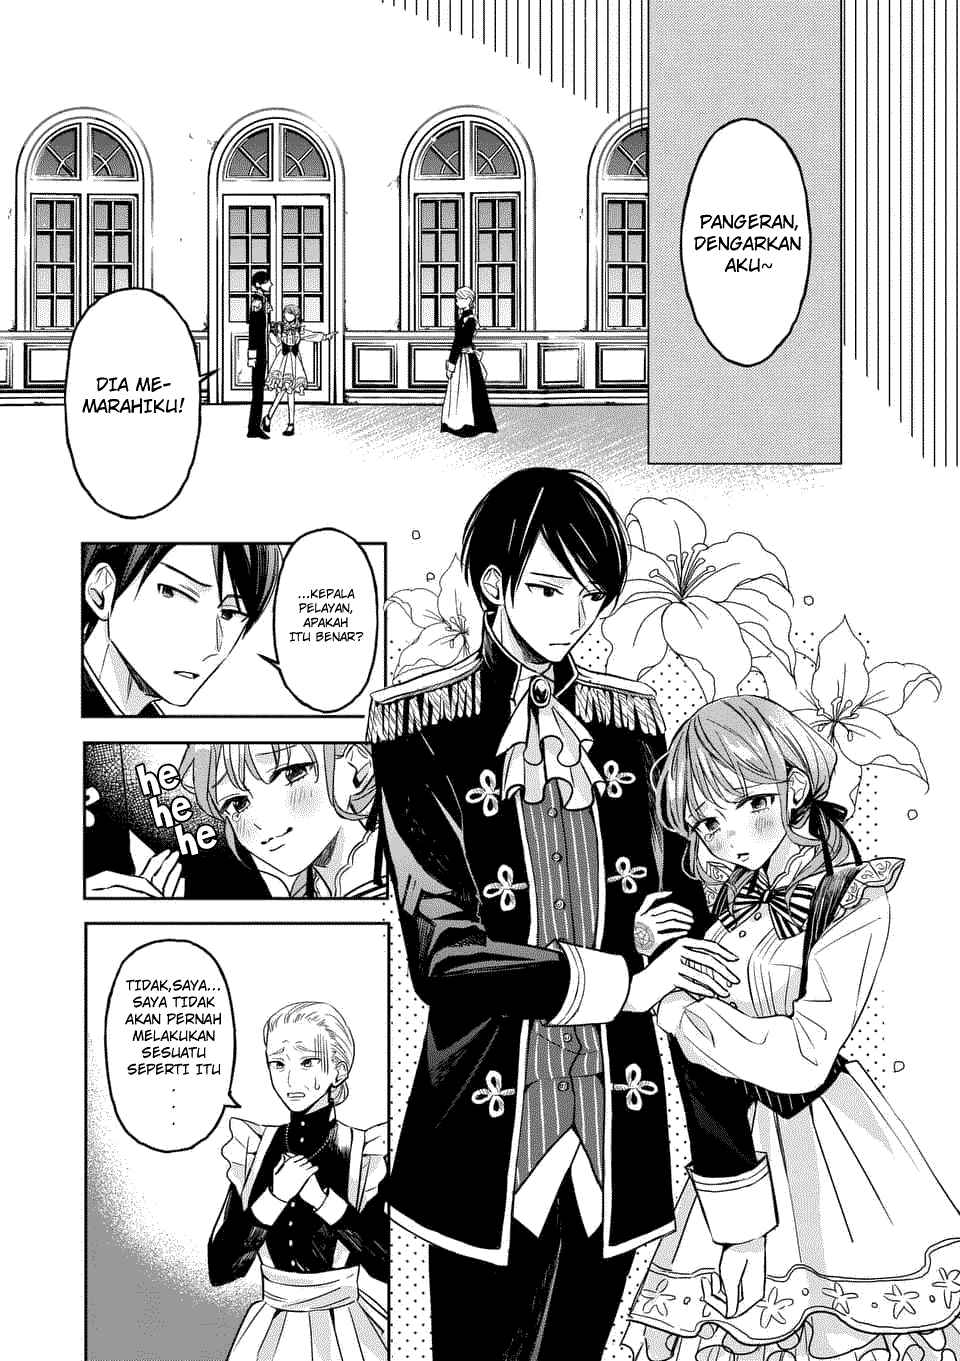 The Savior’s Book Café in Another World Chapter 3